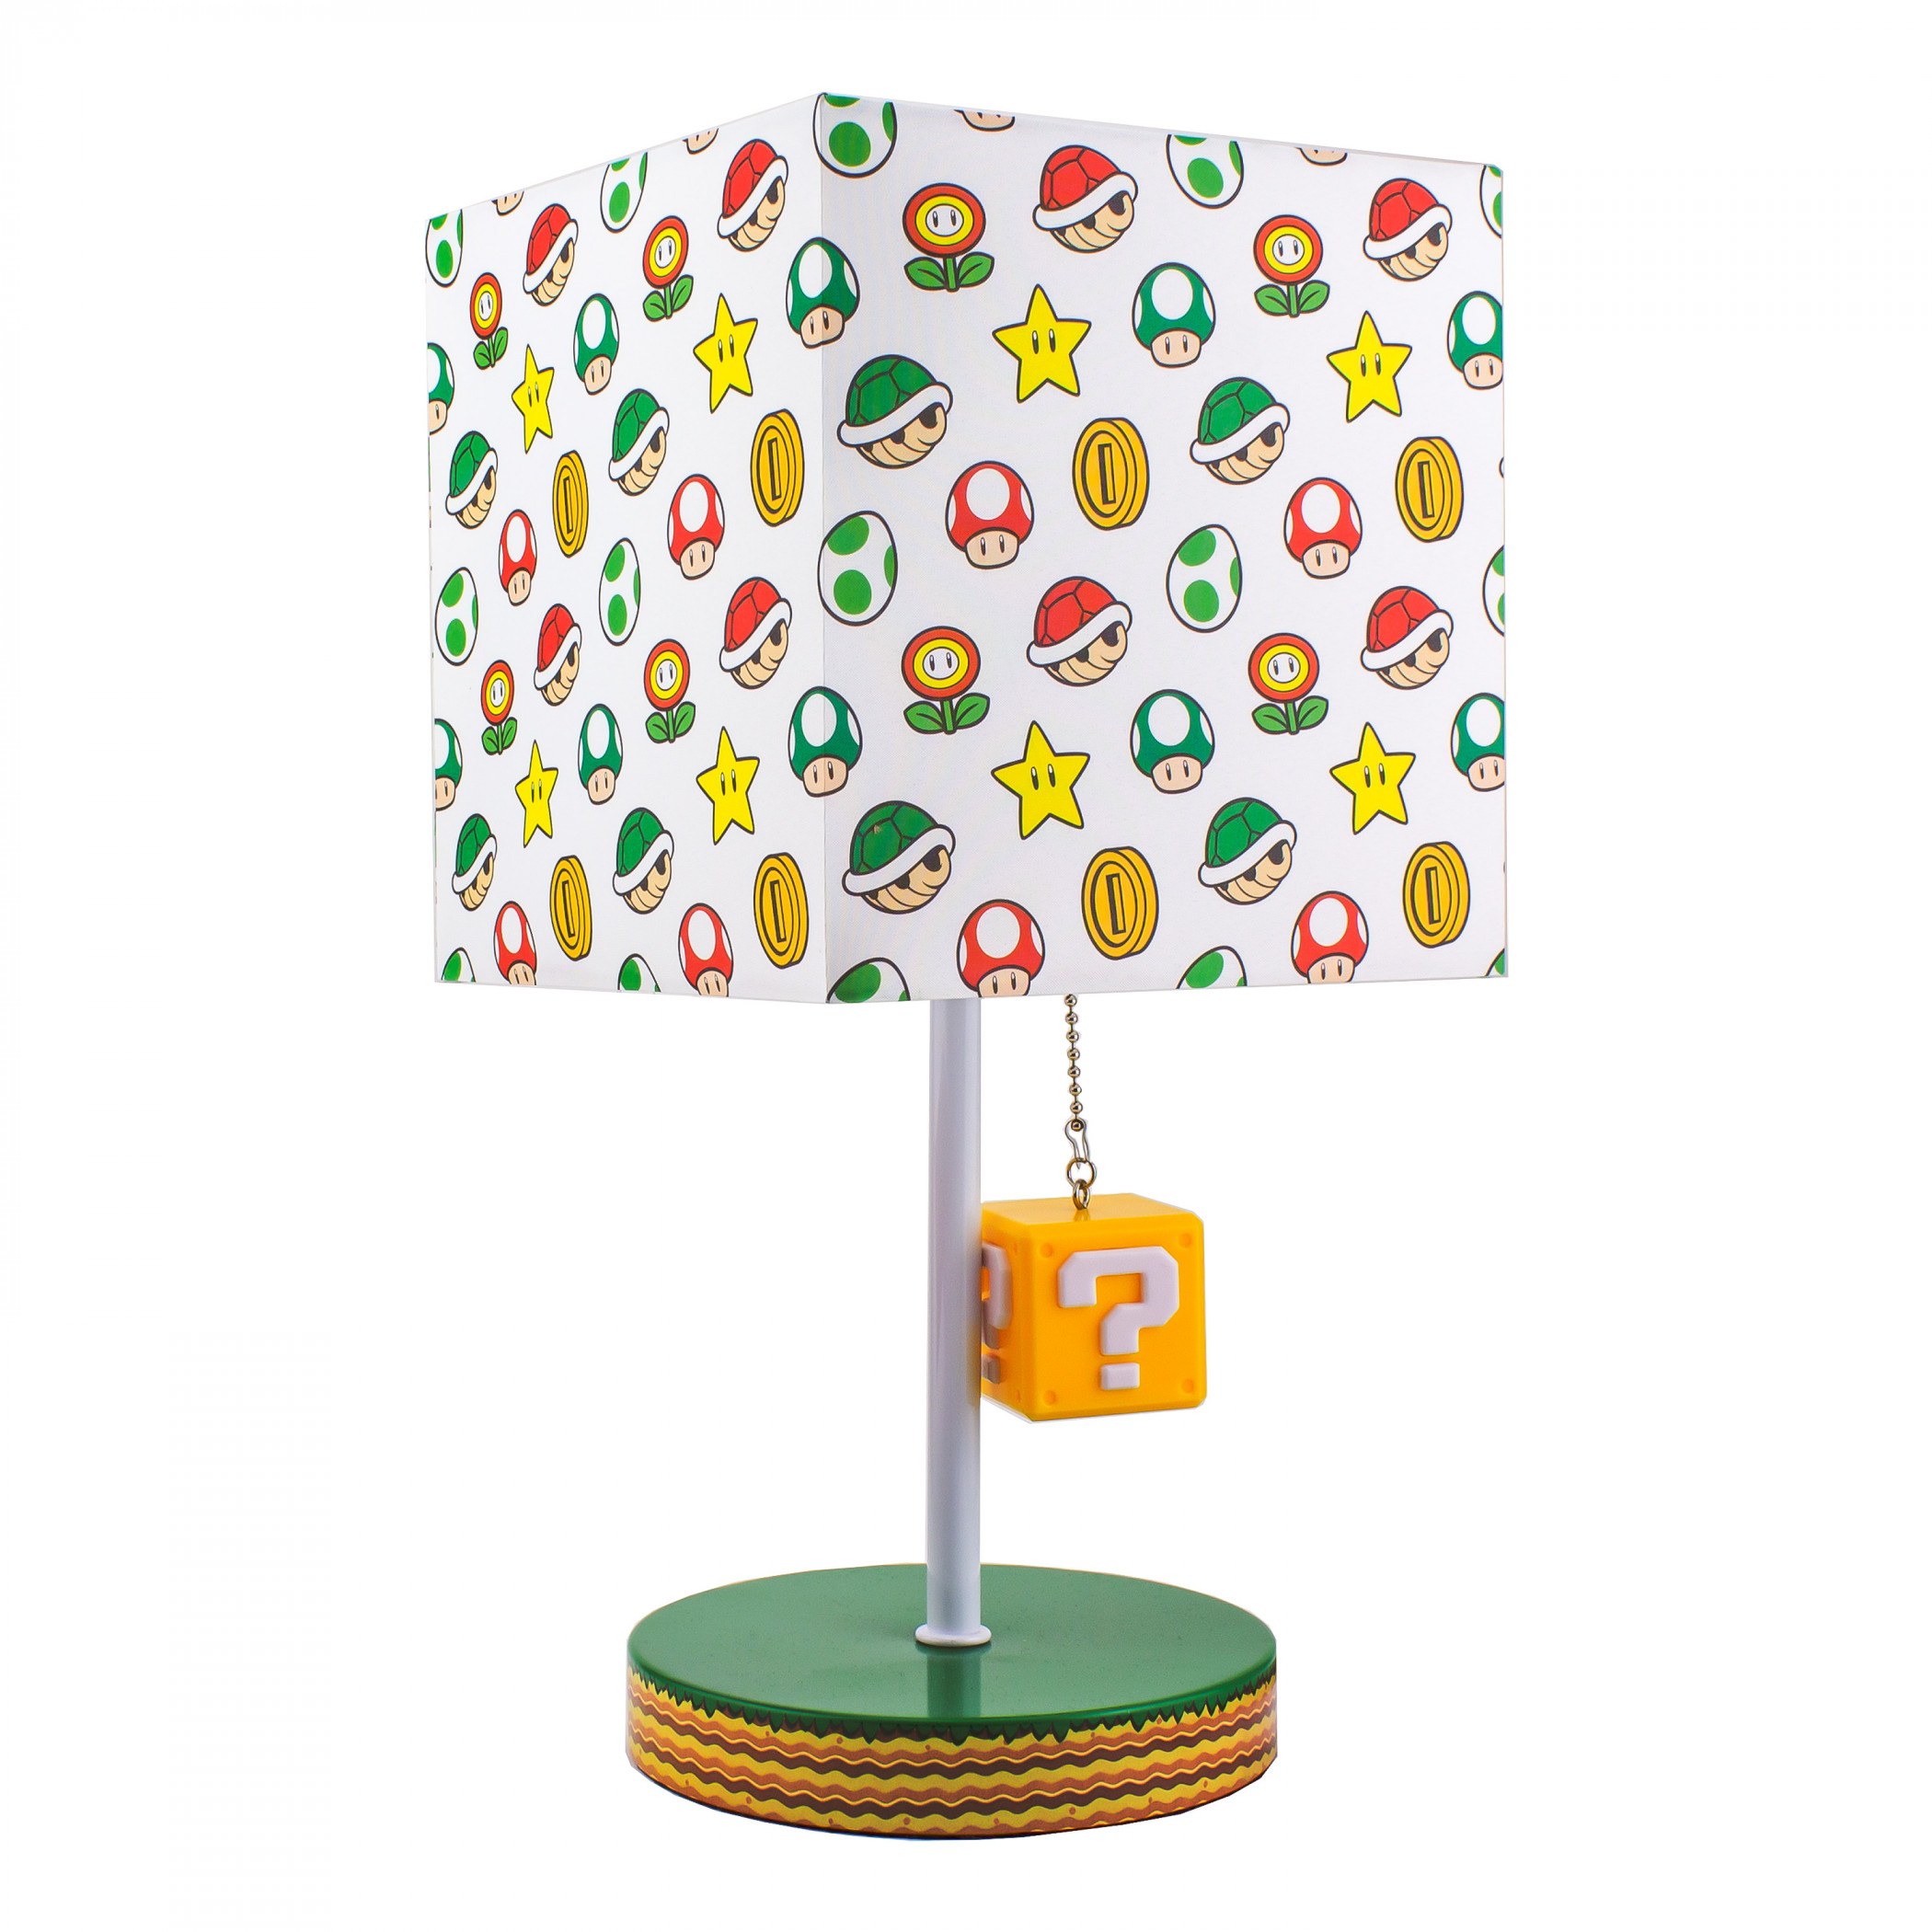 Super Mario Bros. Power Up Desk Lamp with "?" Block Pull Cord